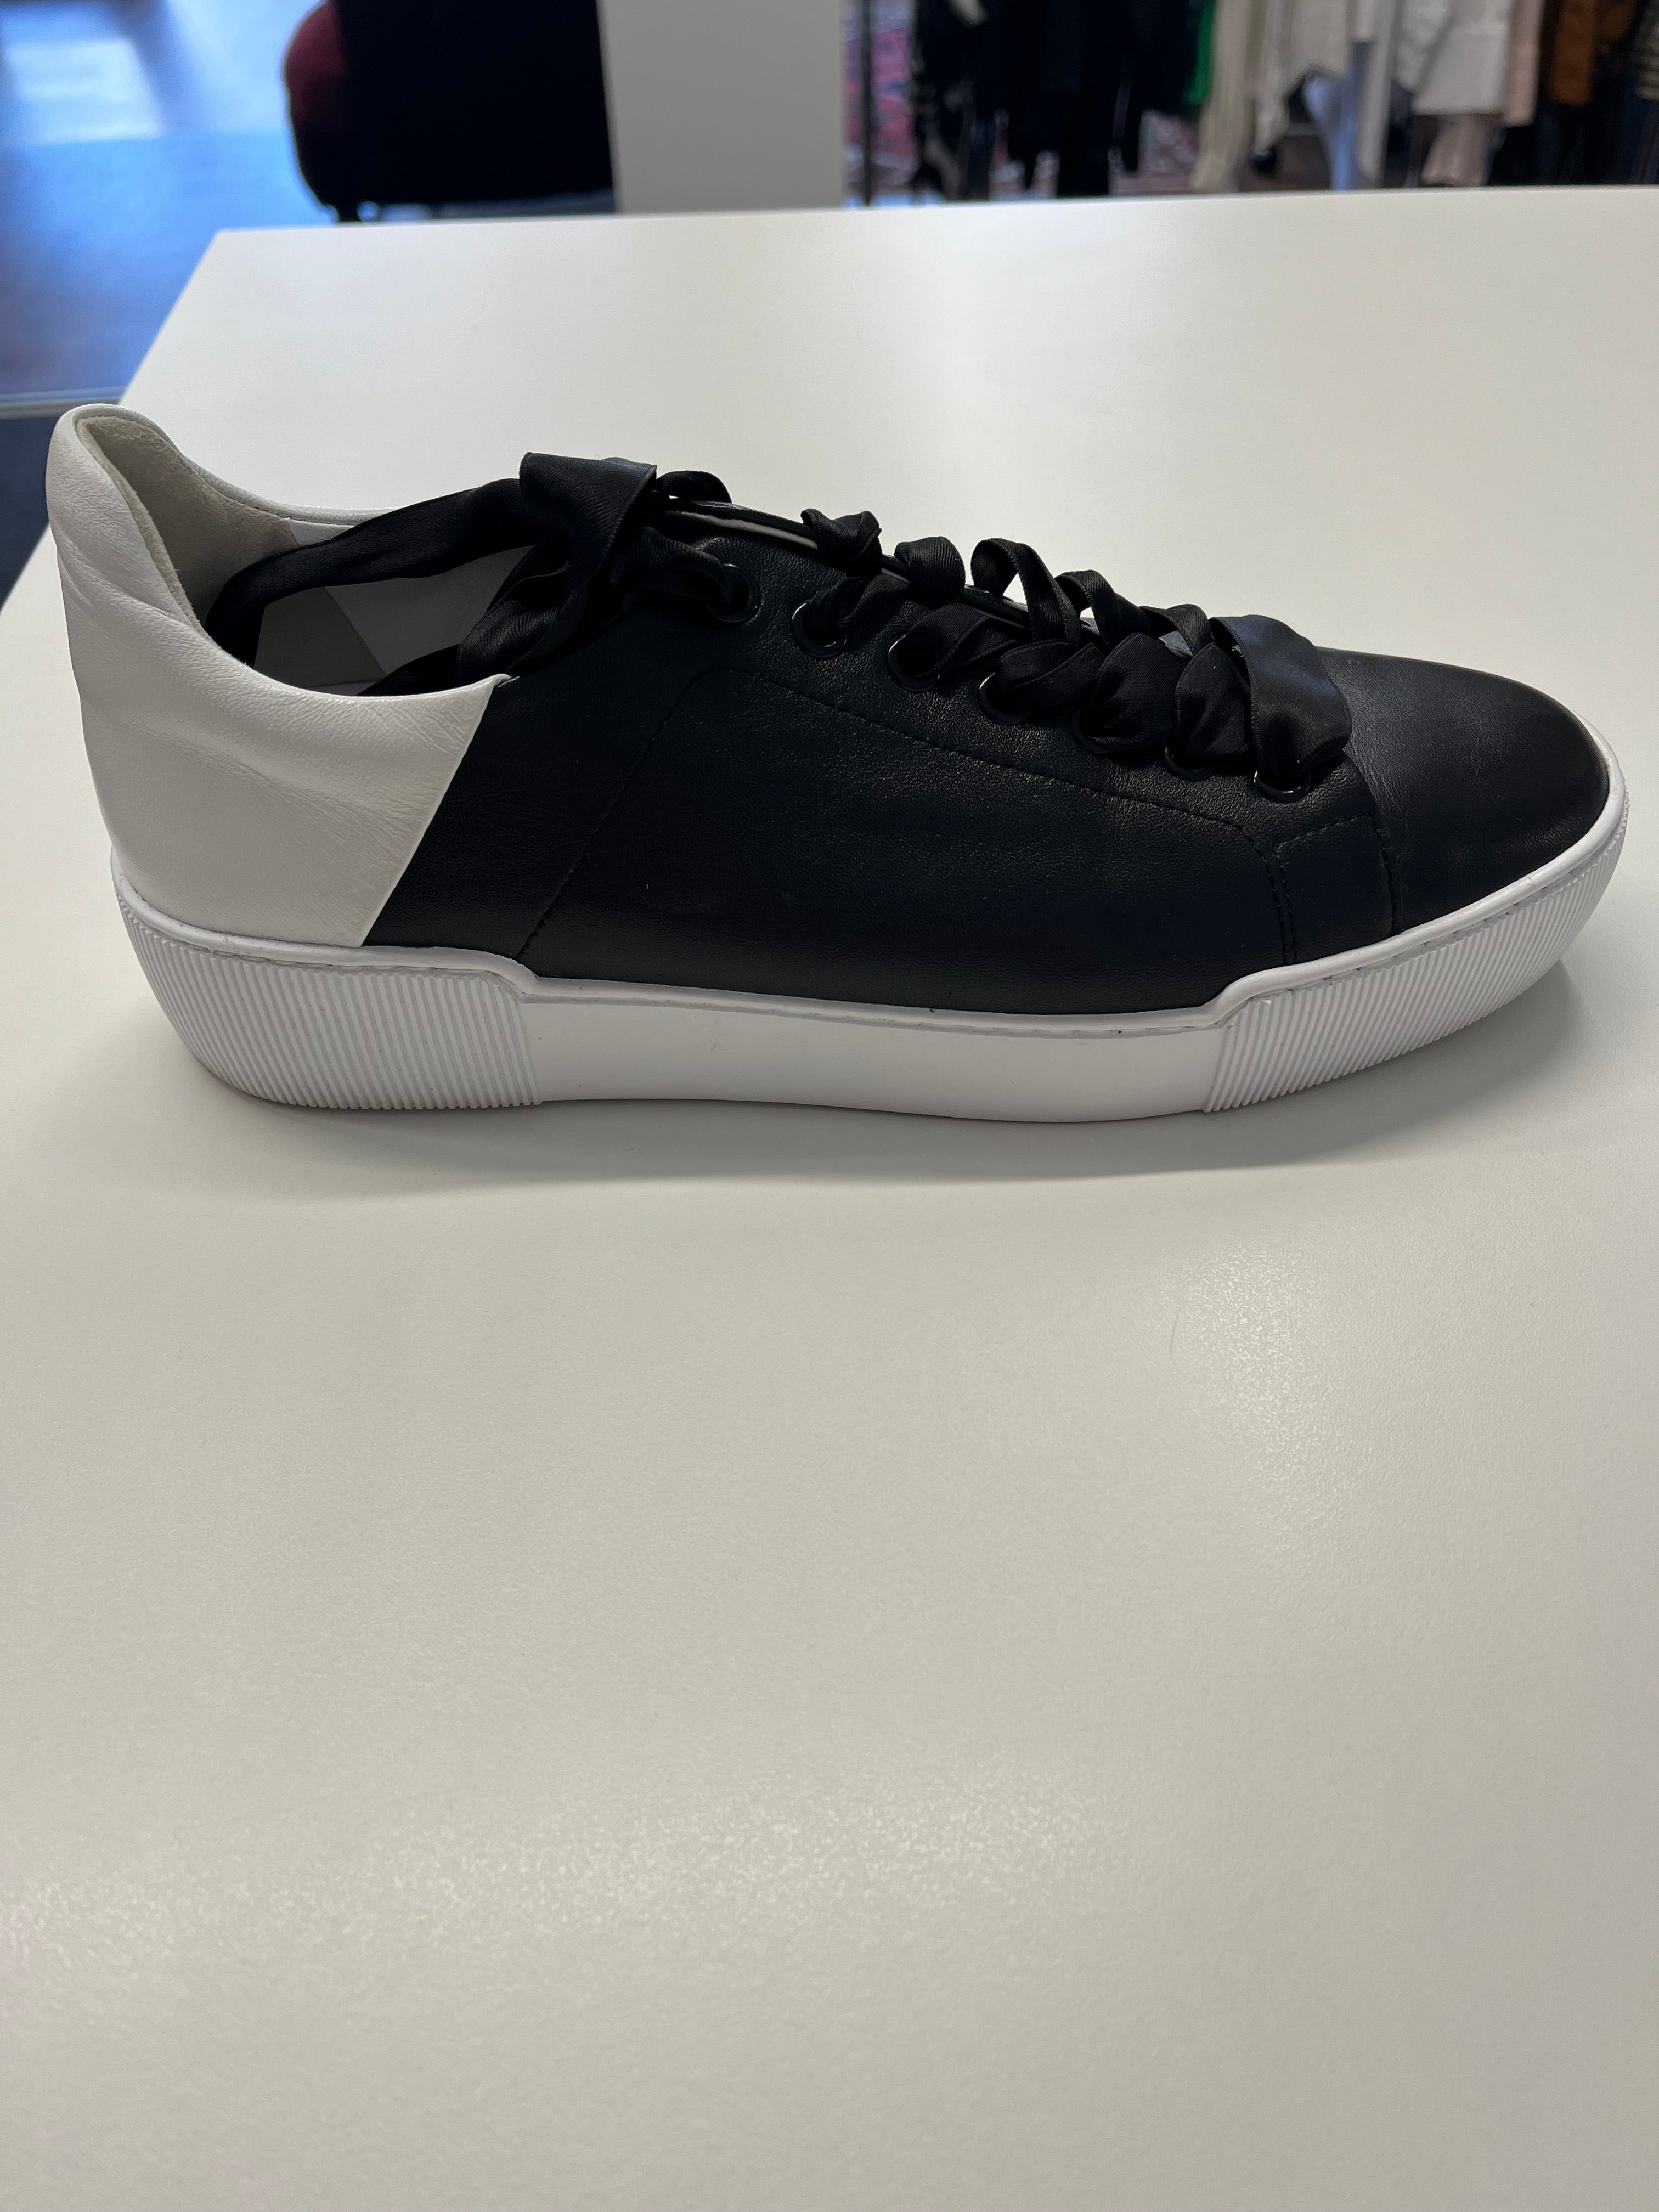 Black & White Leather Sneakers